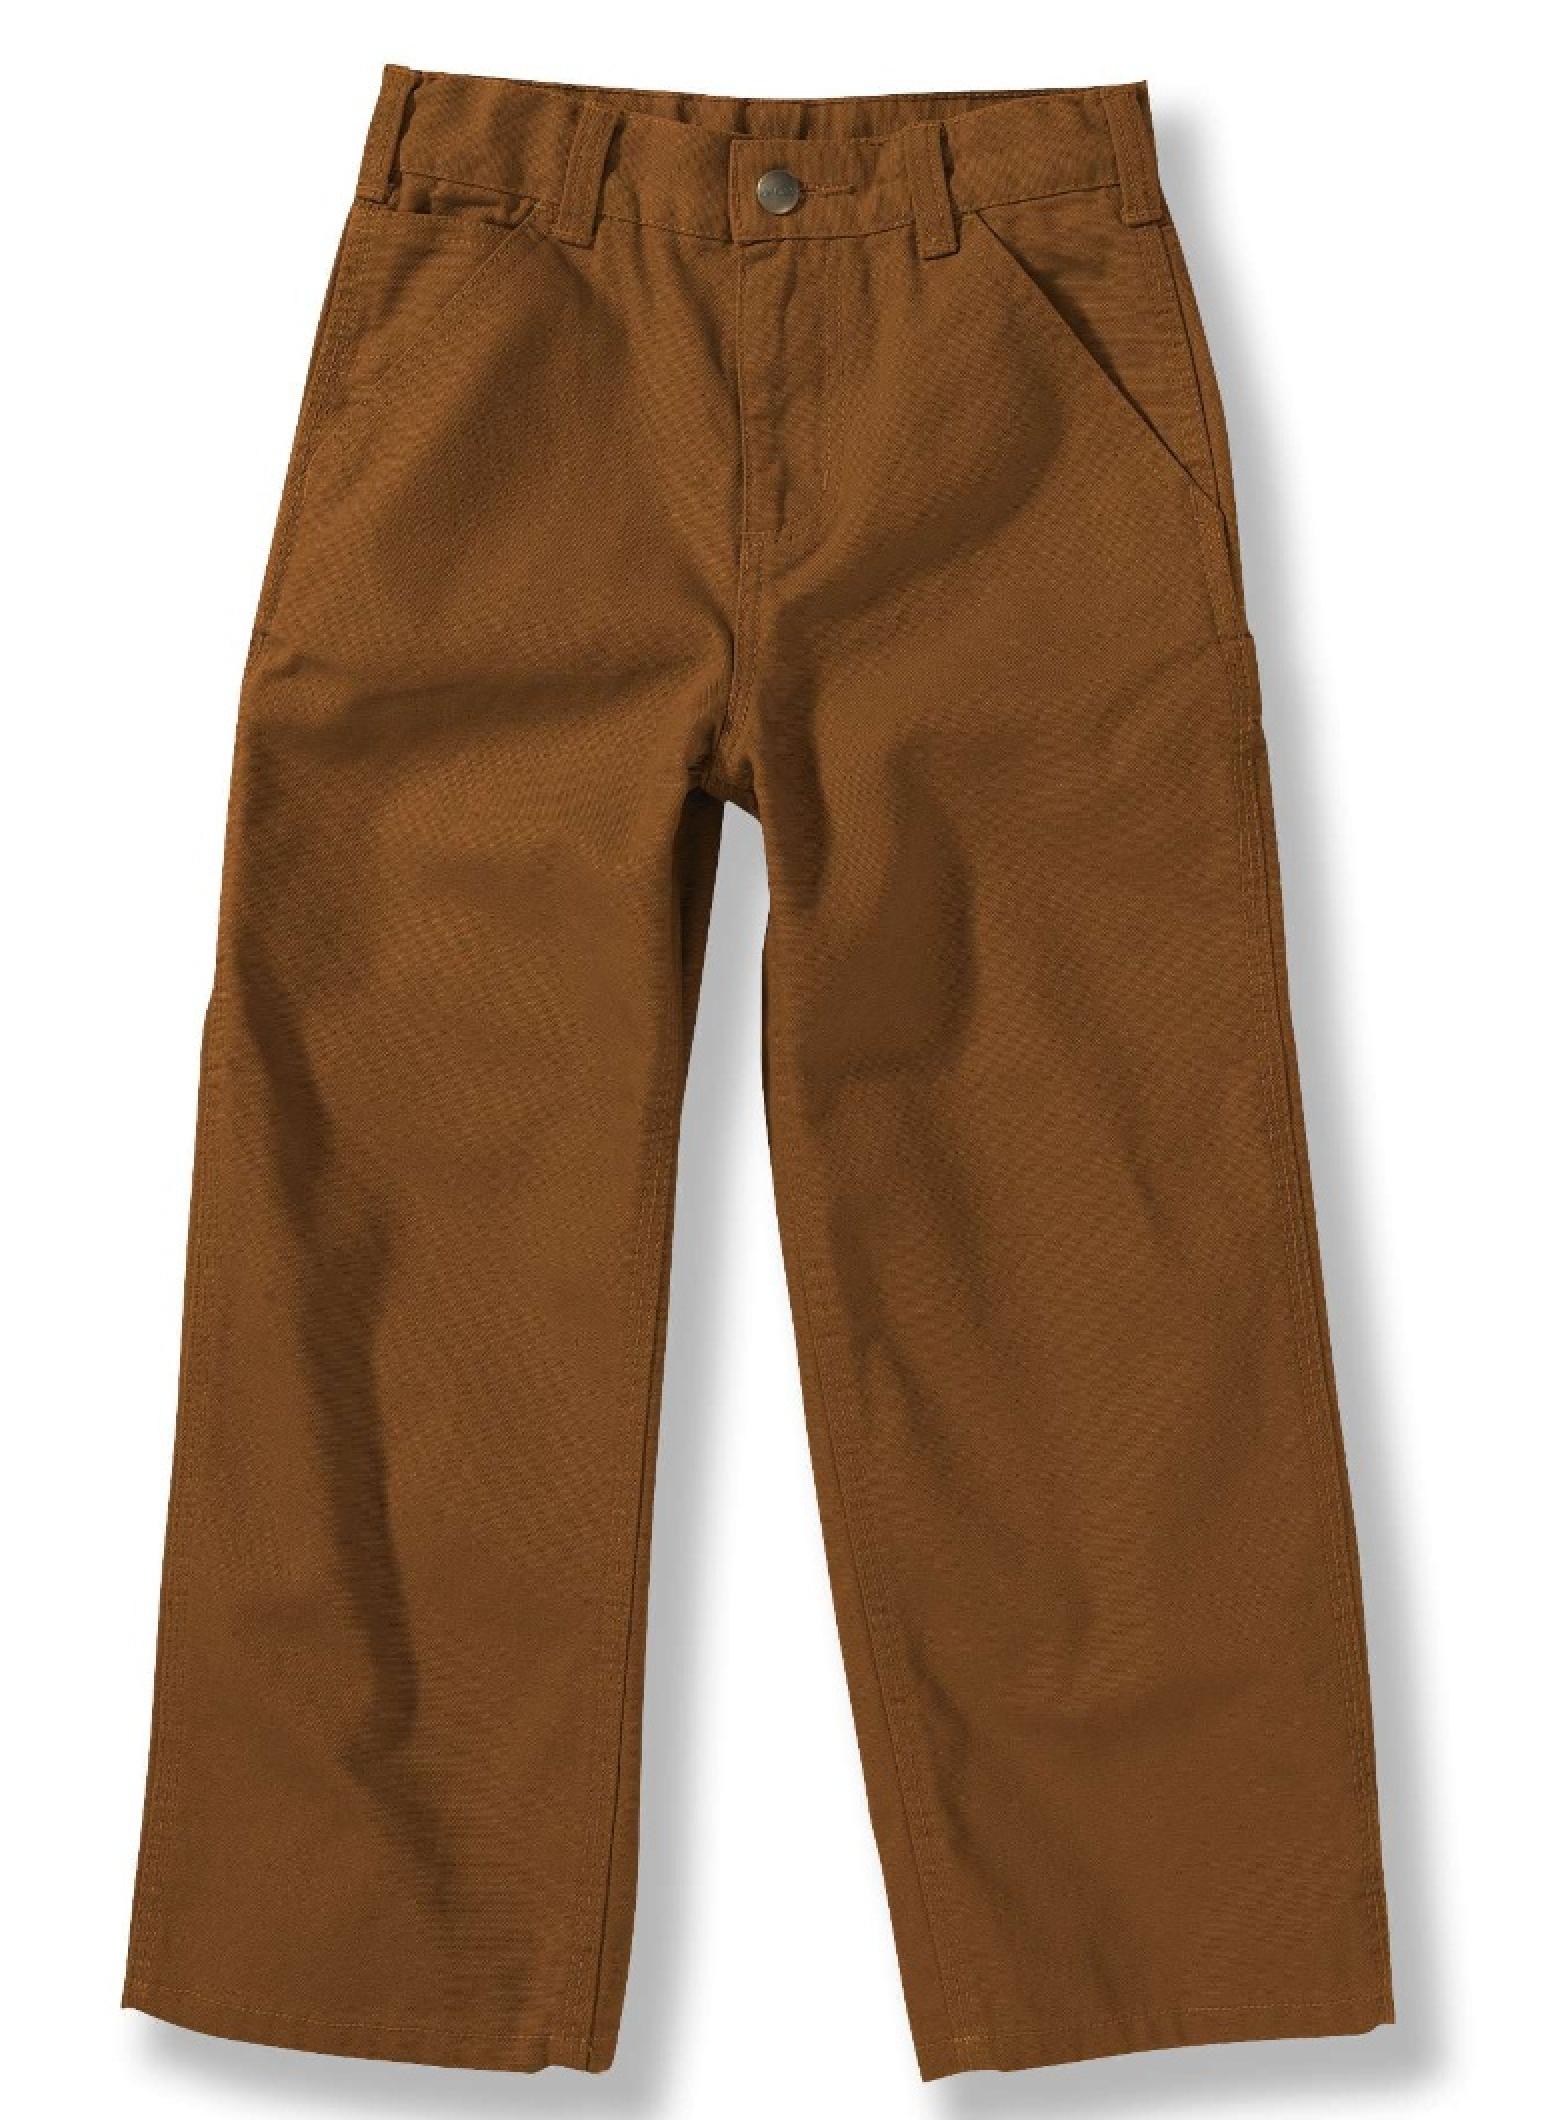 Carhartt Youth Boy's Canvas Dungaree Pants